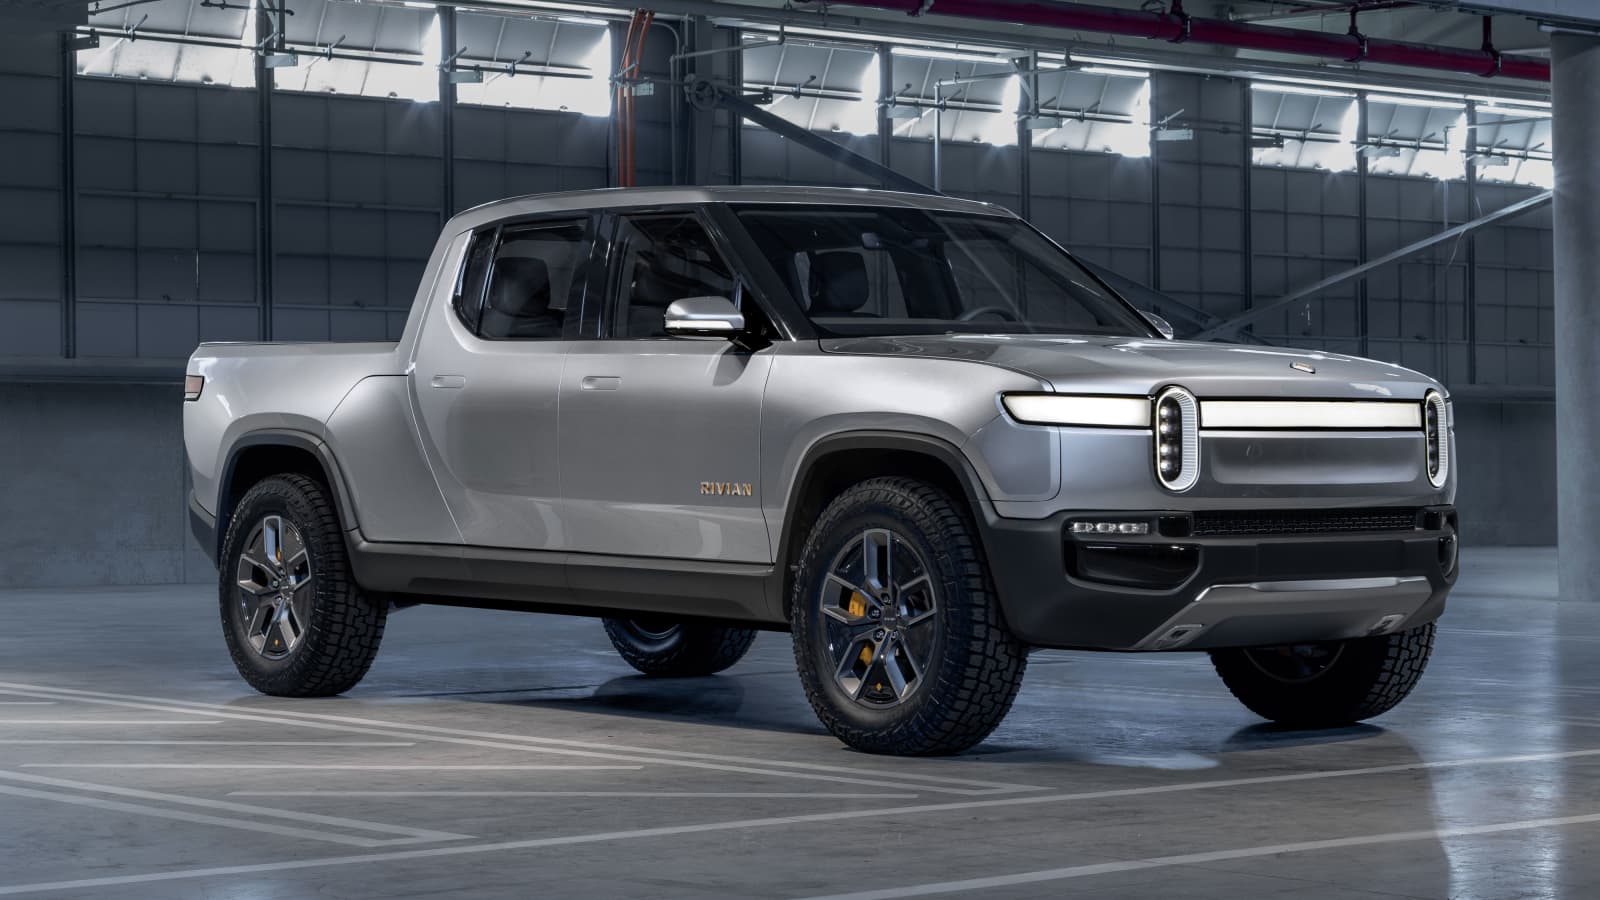 Rivian aims for up to $54.6 billion valuation in upcoming IPO